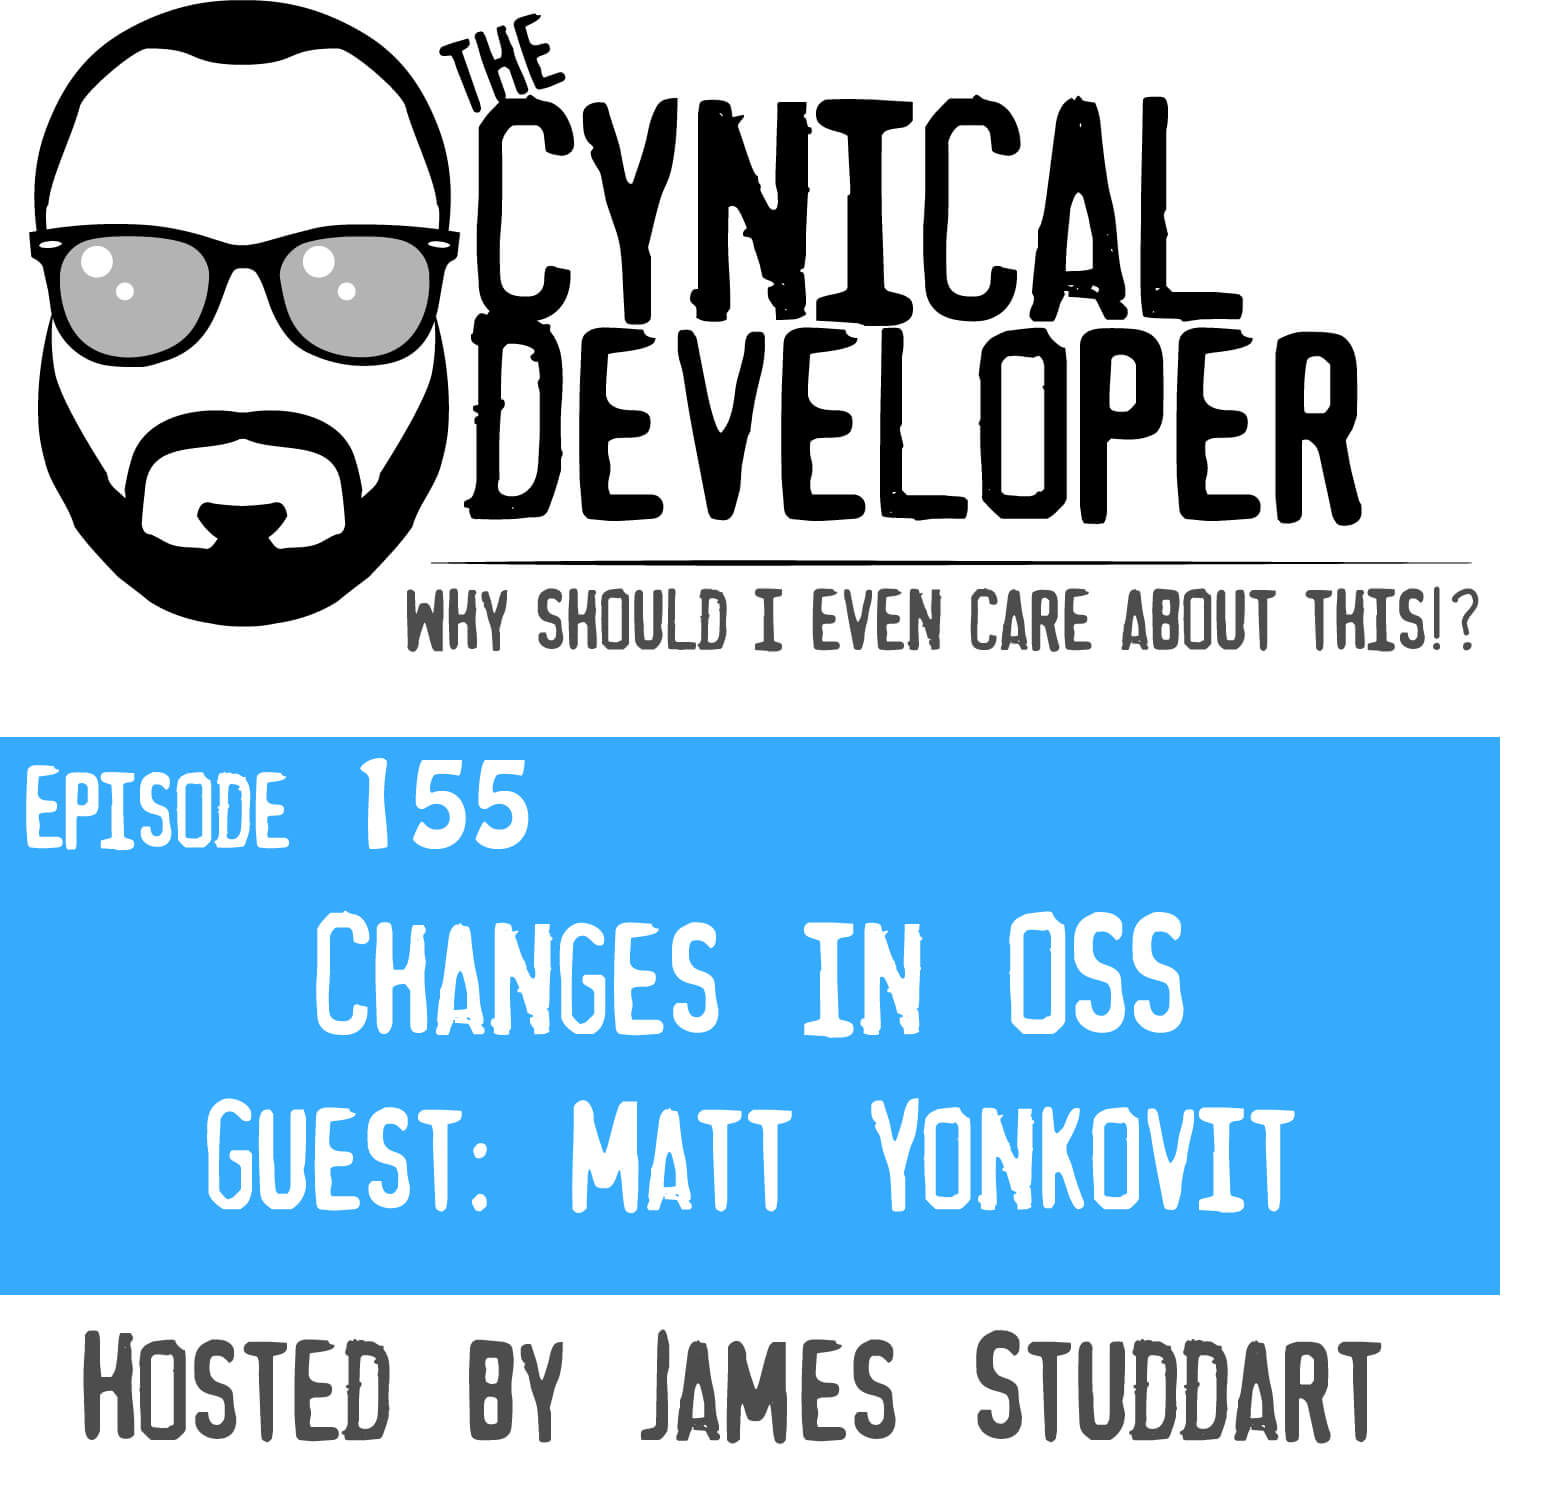 Episode 155 - Changes in OSS